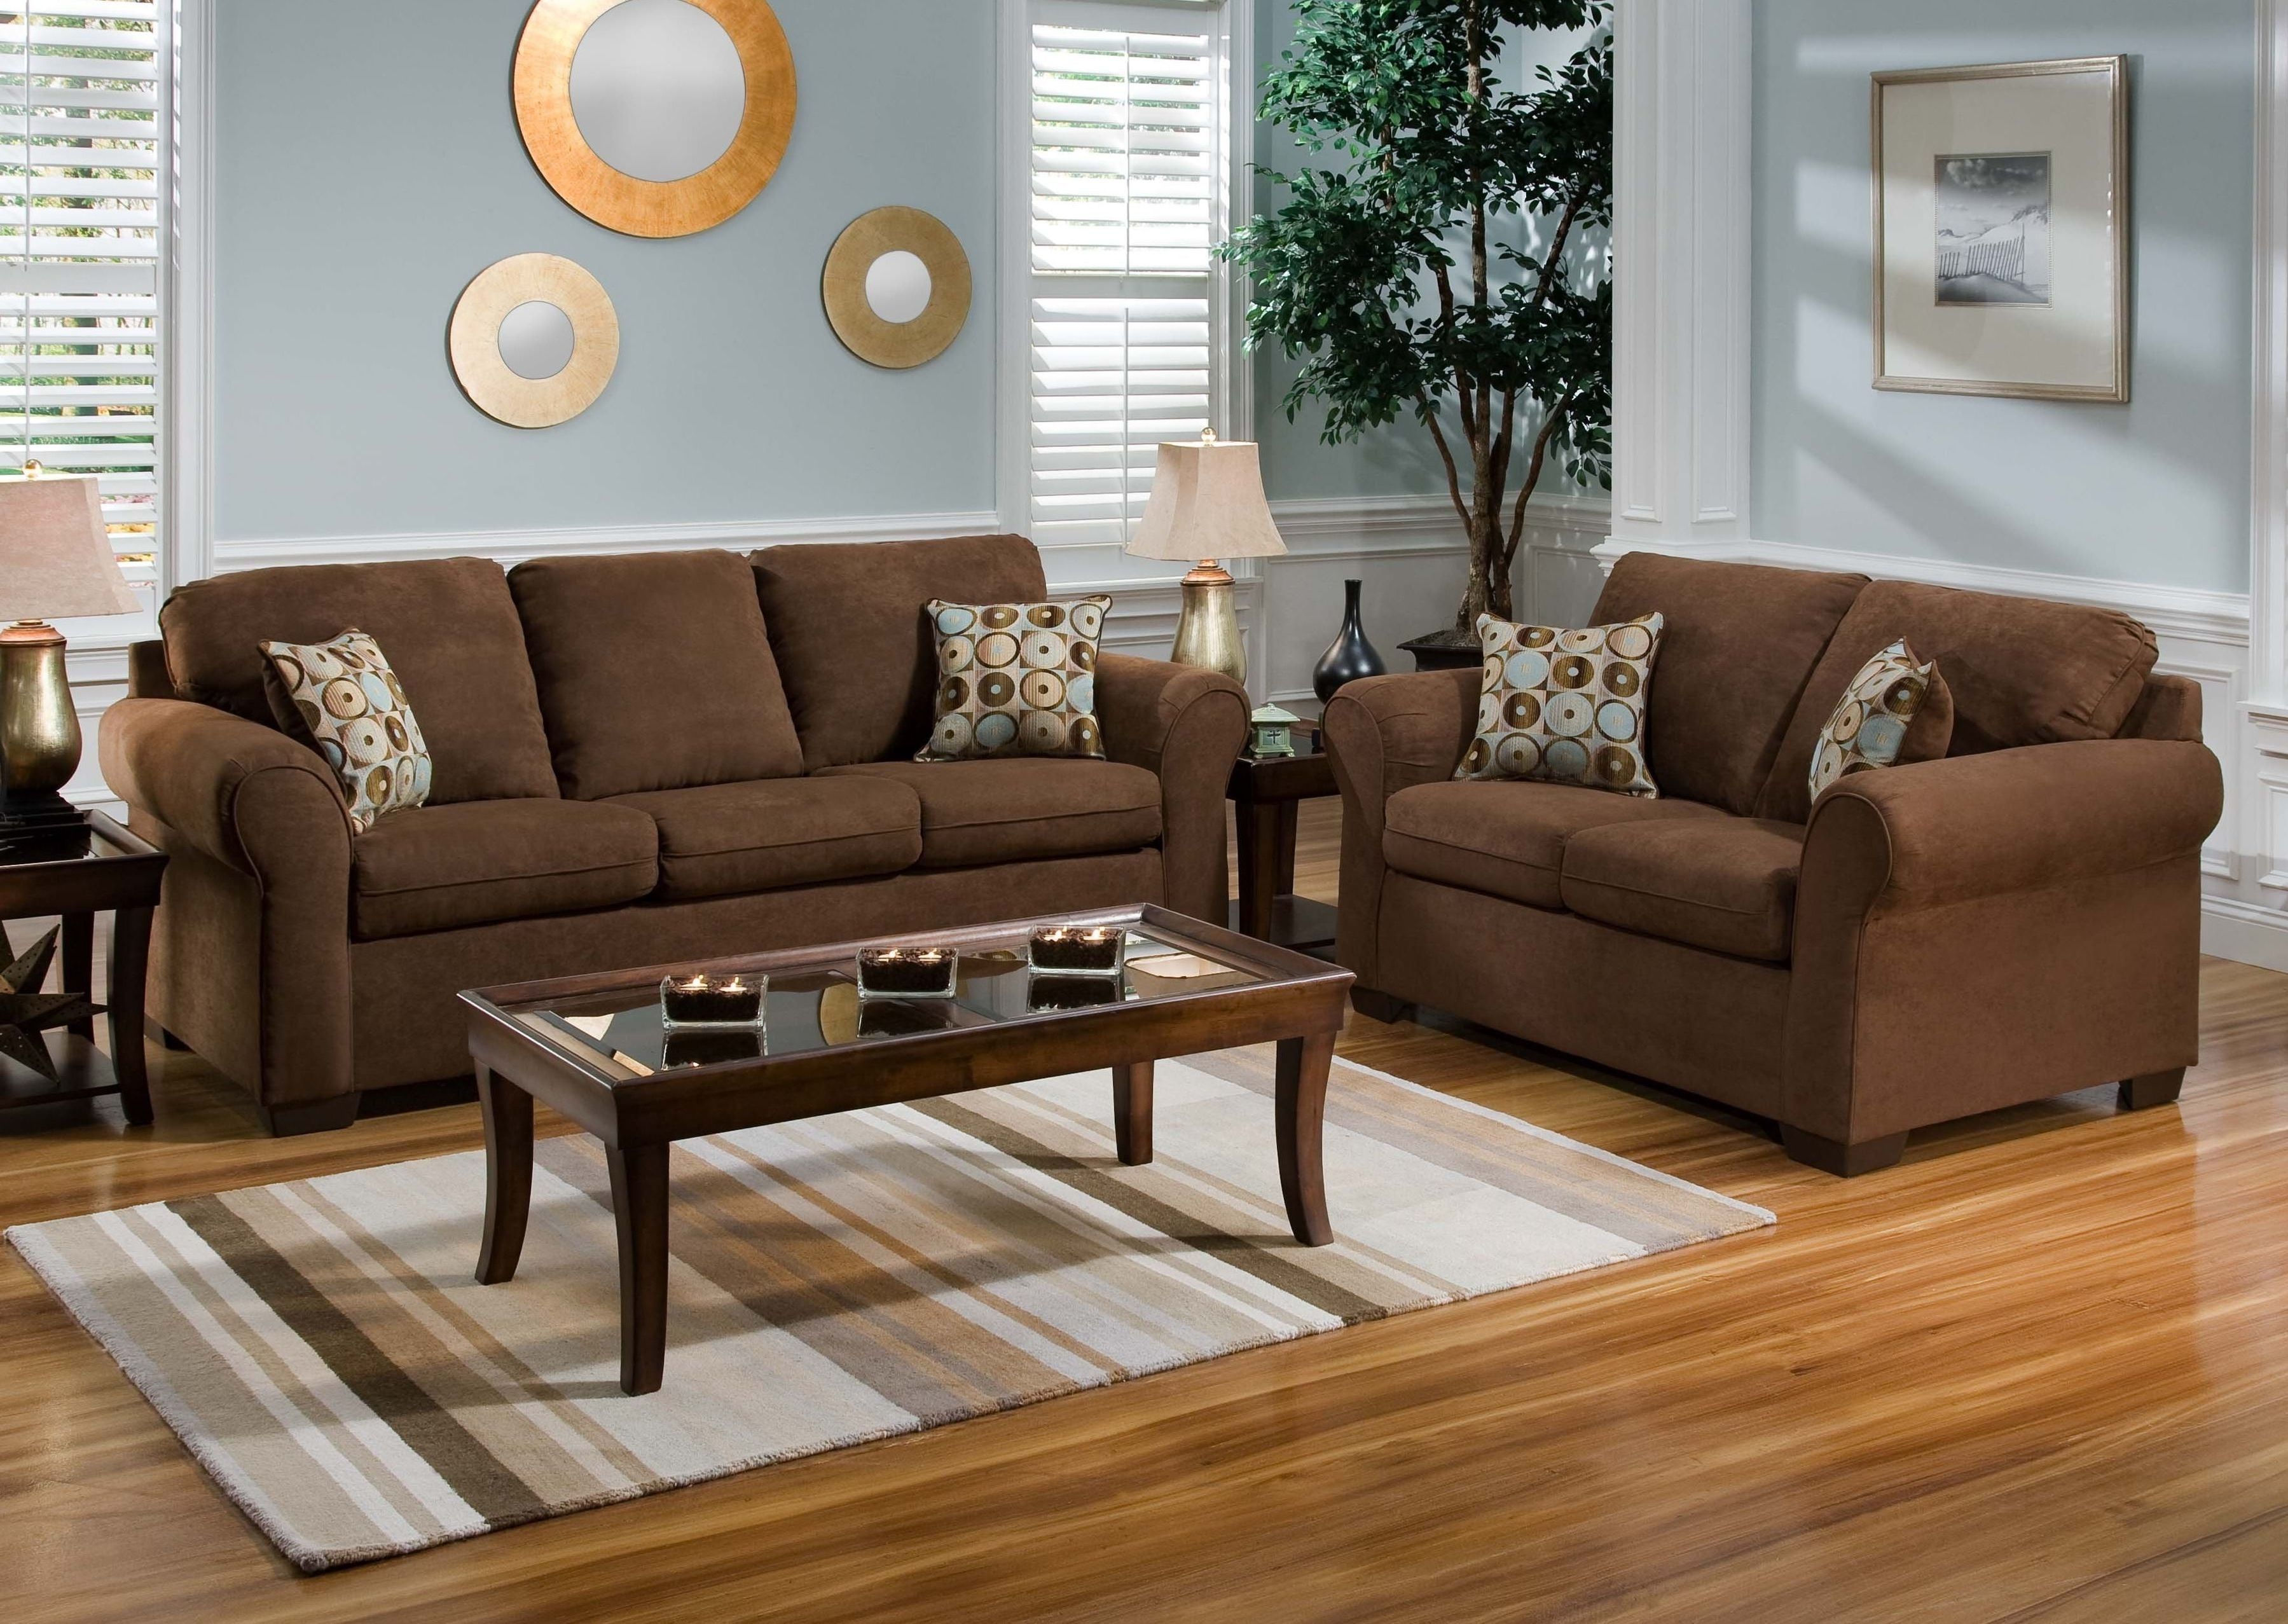 Have Light Brown Sofa In Living Room